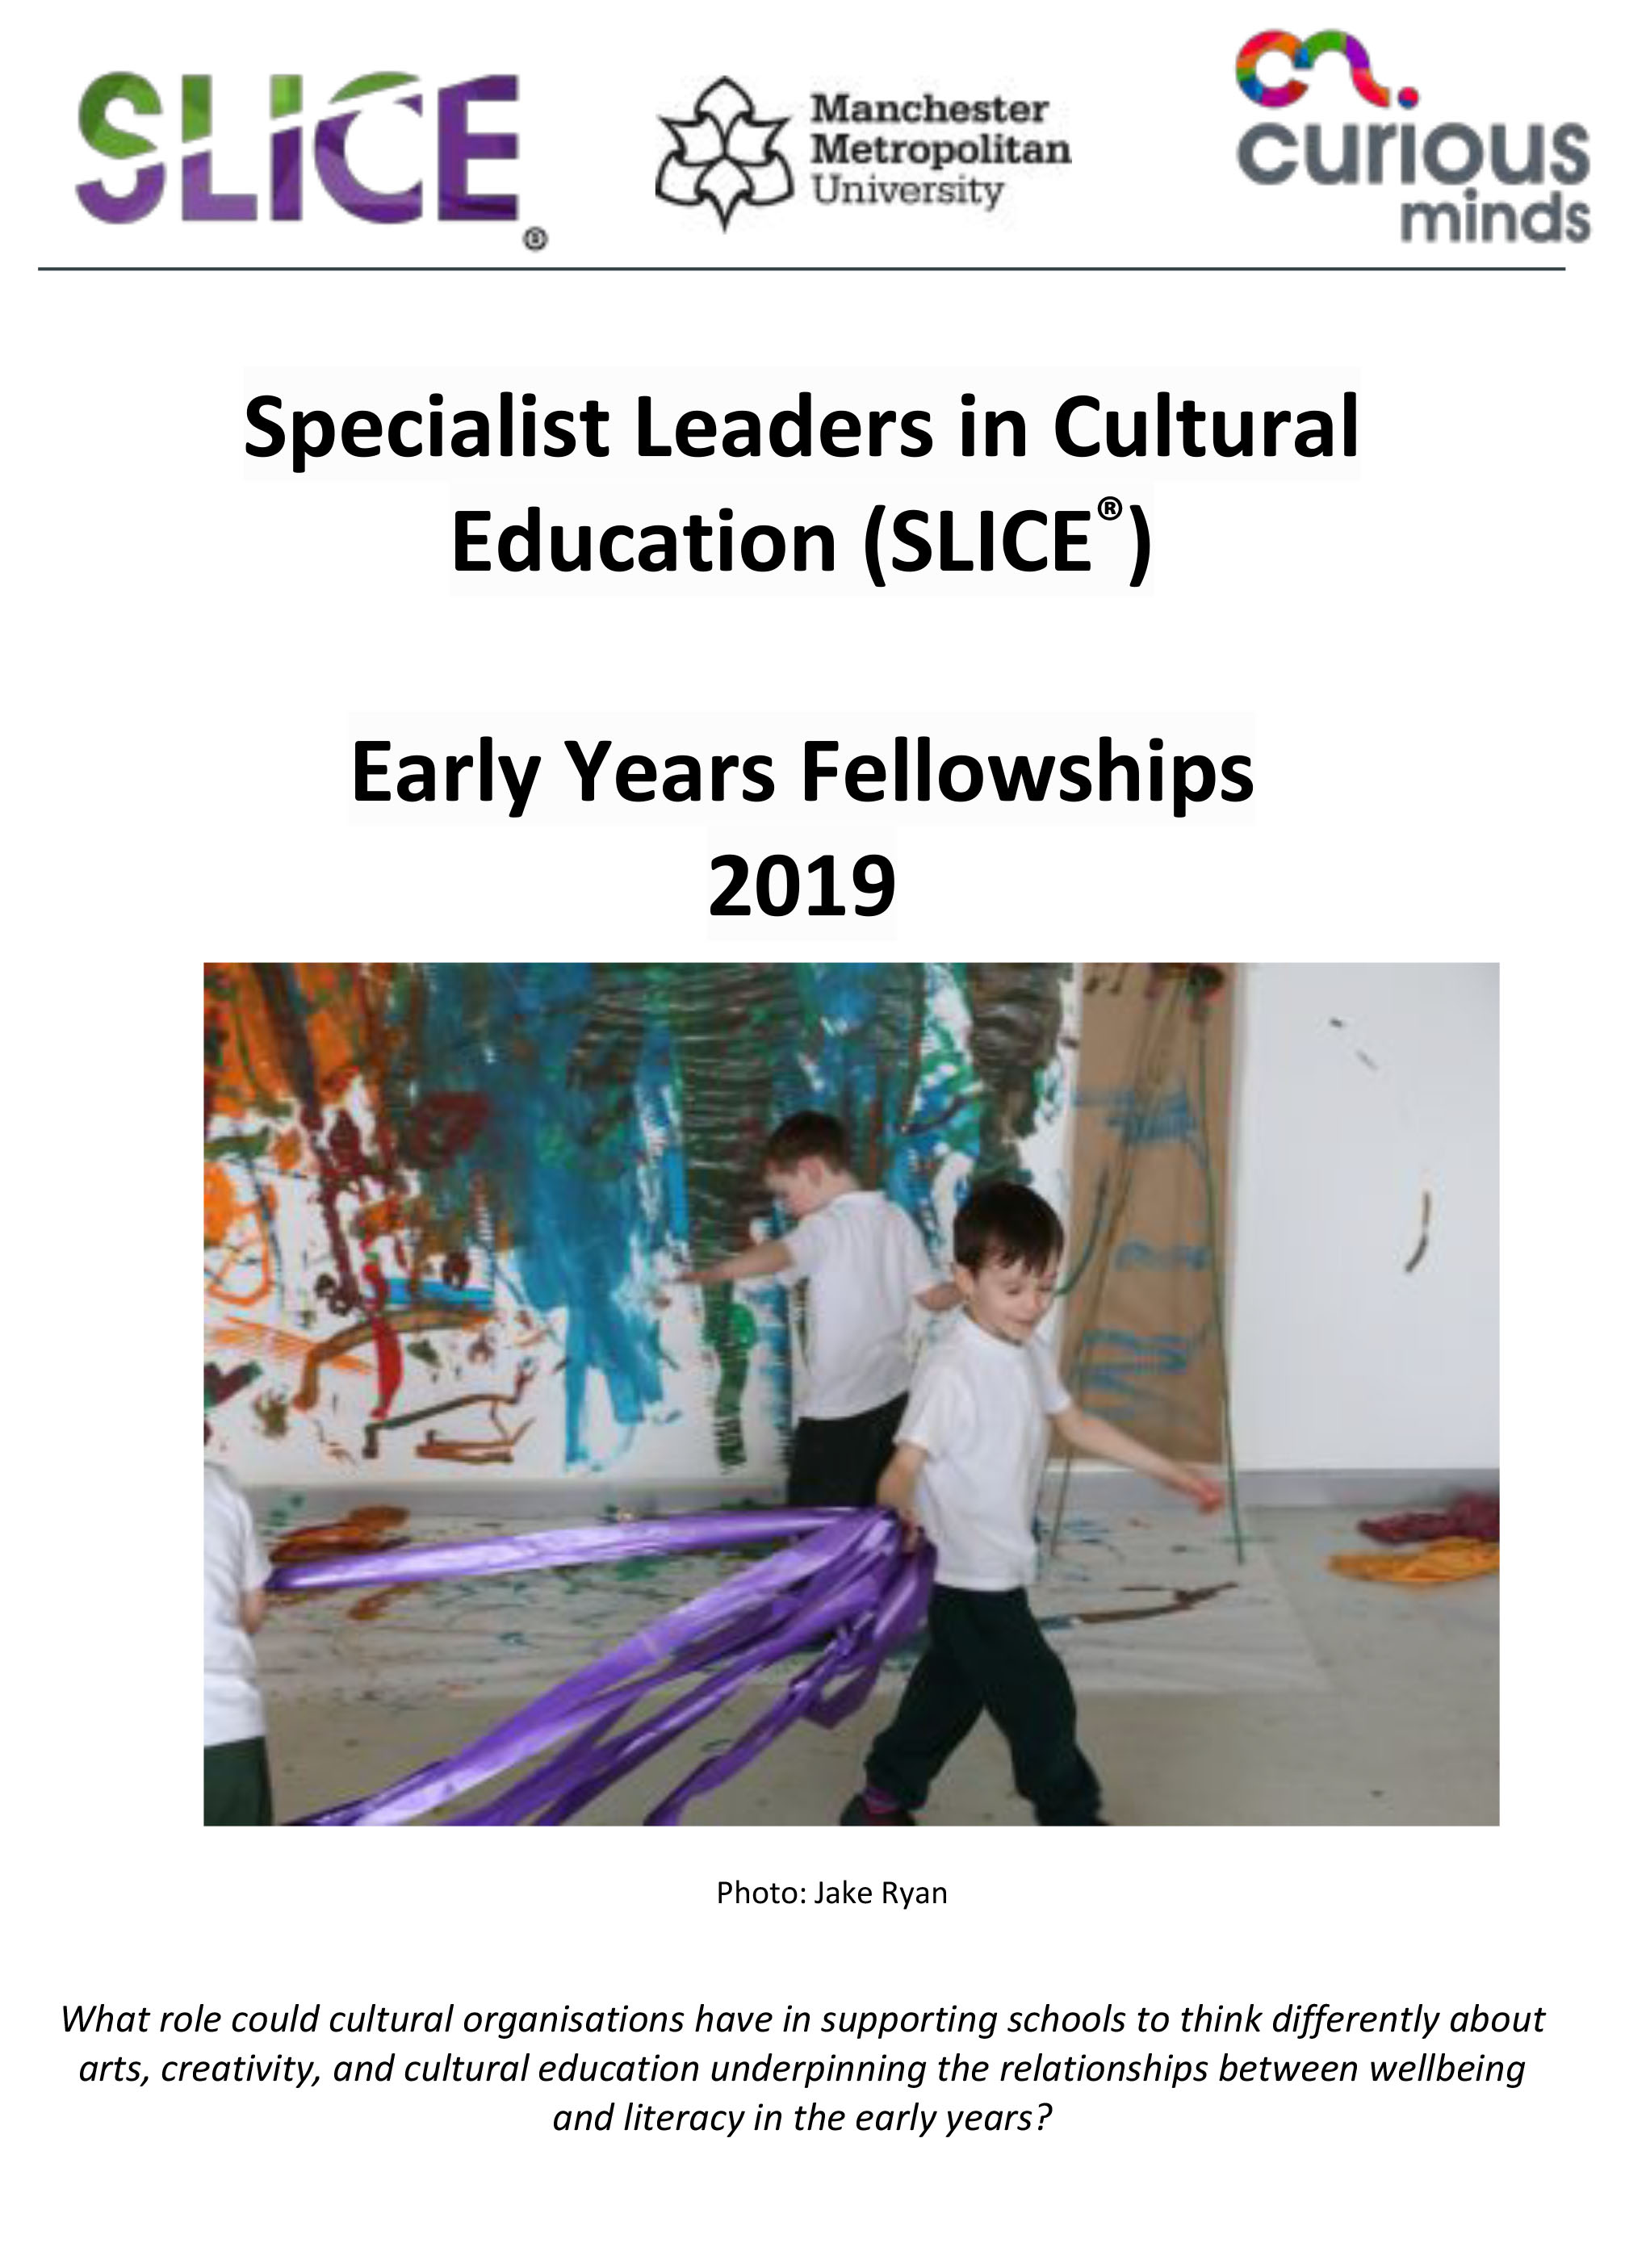 Specialist Leaders in Cultural Education